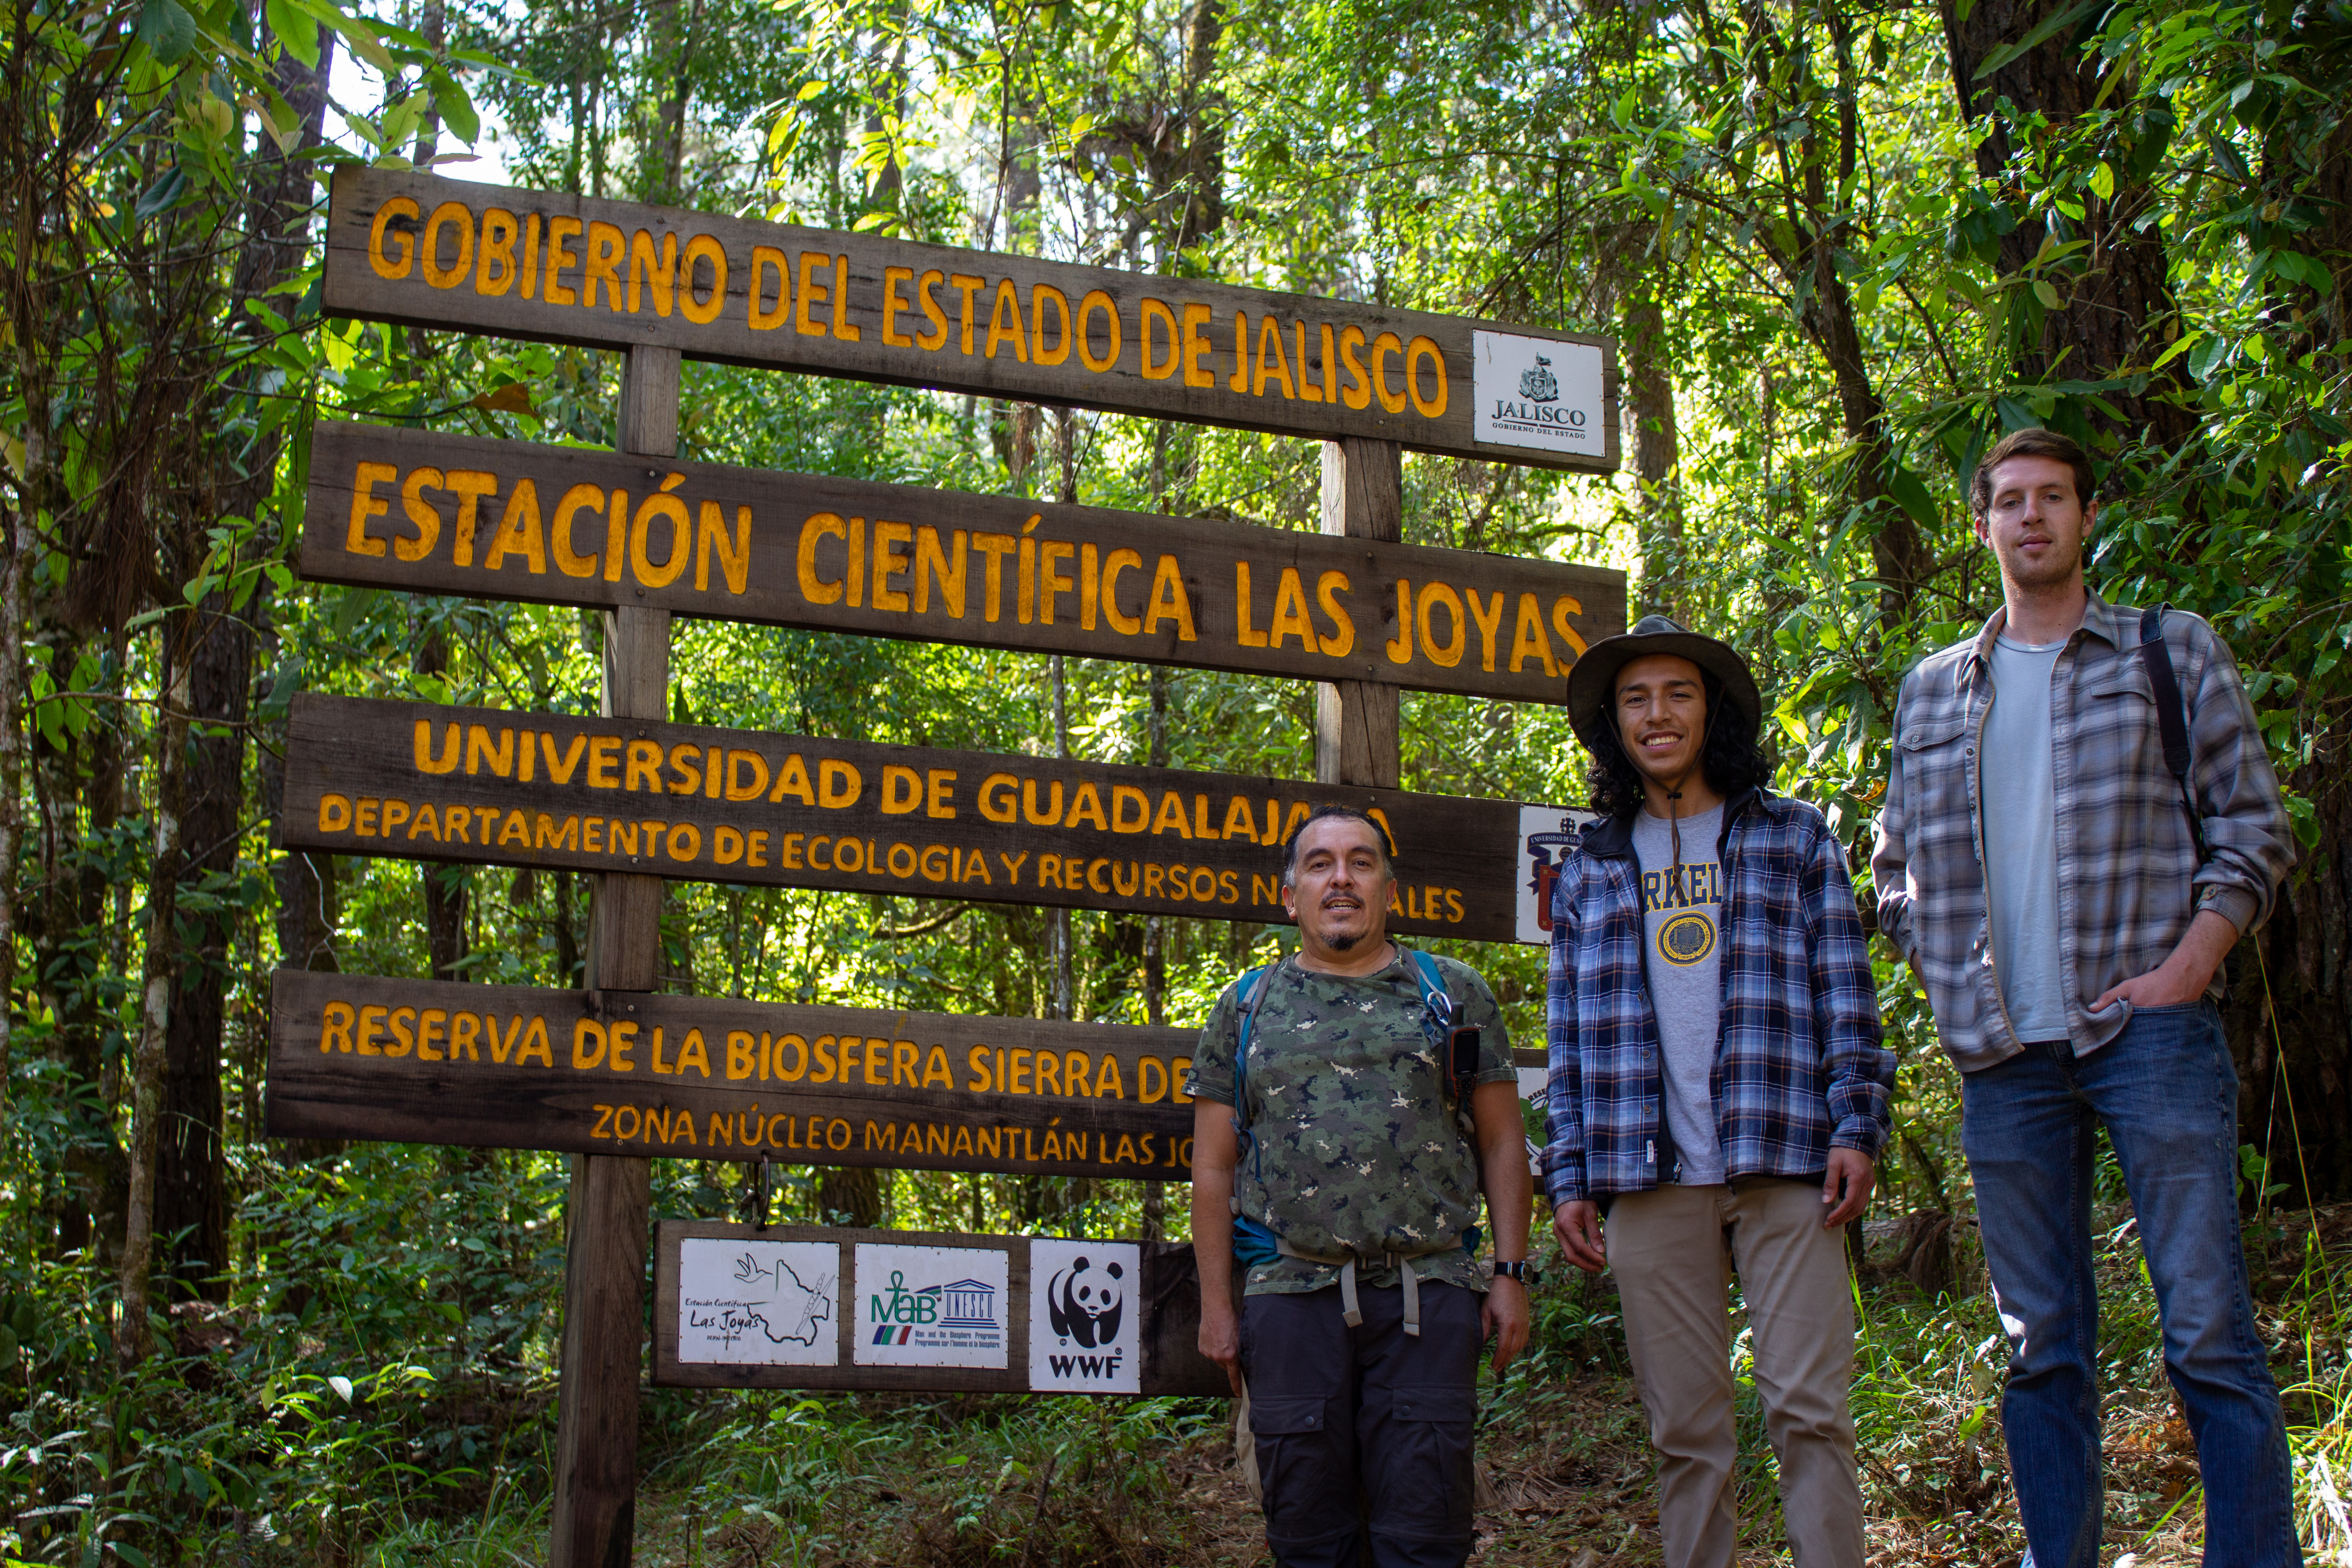 Aguilar standing with two others next to a sign in a forest that reads "Gobierno Del Estado de Jalisco"